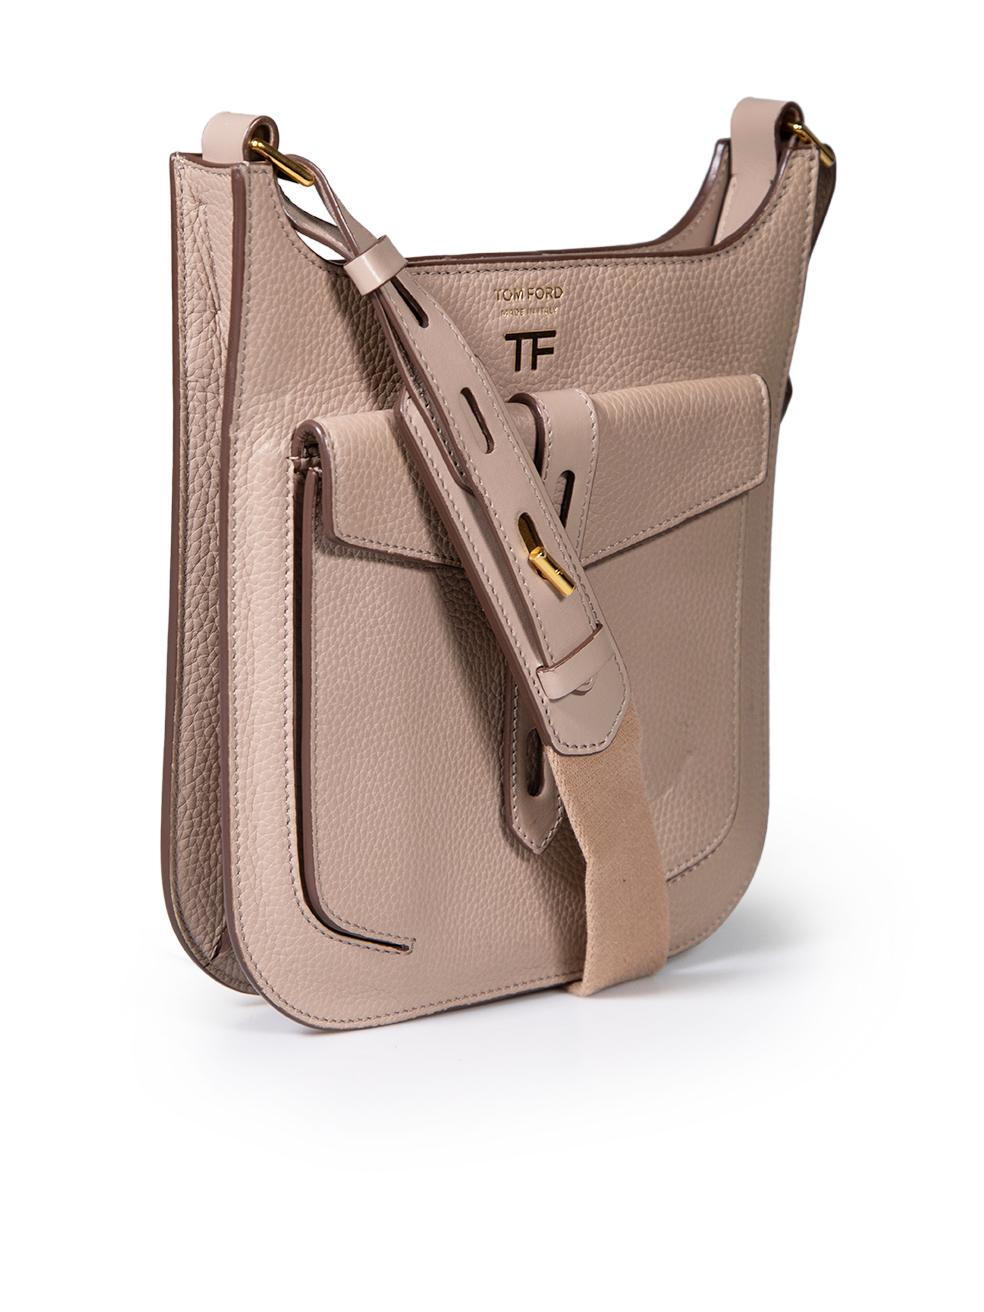 CONDITION is Very good. Minimal wear to bag is evident. Minimal indent and discolouration to the front of this used Tom Ford designer resale item.
 
 
 
 Details
 
 
 Beige
 
 Leather
 
 T-Twist mini crossbody bag
 
 1x Adjustable strap
 
 1x Main